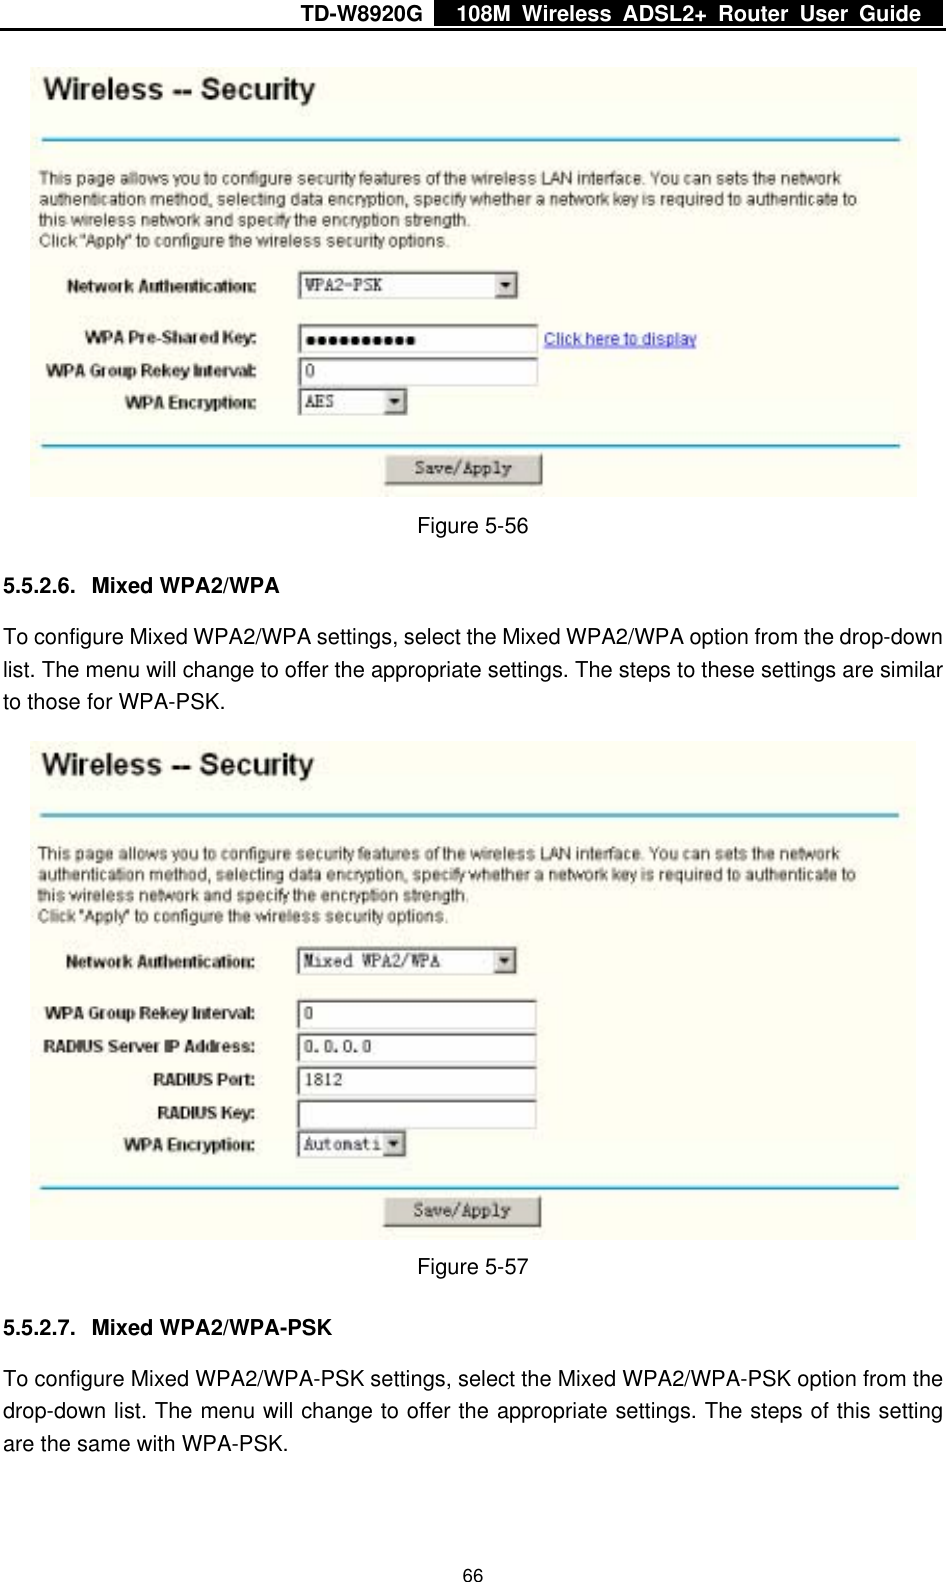 TD-W8920G    108M Wireless ADSL2+ Router User Guide    66 Figure 5-56 5.5.2.6. Mixed WPA2/WPA To configure Mixed WPA2/WPA settings, select the Mixed WPA2/WPA option from the drop-down list. The menu will change to offer the appropriate settings. The steps to these settings are similar to those for WPA-PSK.  Figure 5-57 5.5.2.7. Mixed WPA2/WPA-PSK To configure Mixed WPA2/WPA-PSK settings, select the Mixed WPA2/WPA-PSK option from the drop-down list. The menu will change to offer the appropriate settings. The steps of this setting are the same with WPA-PSK. 